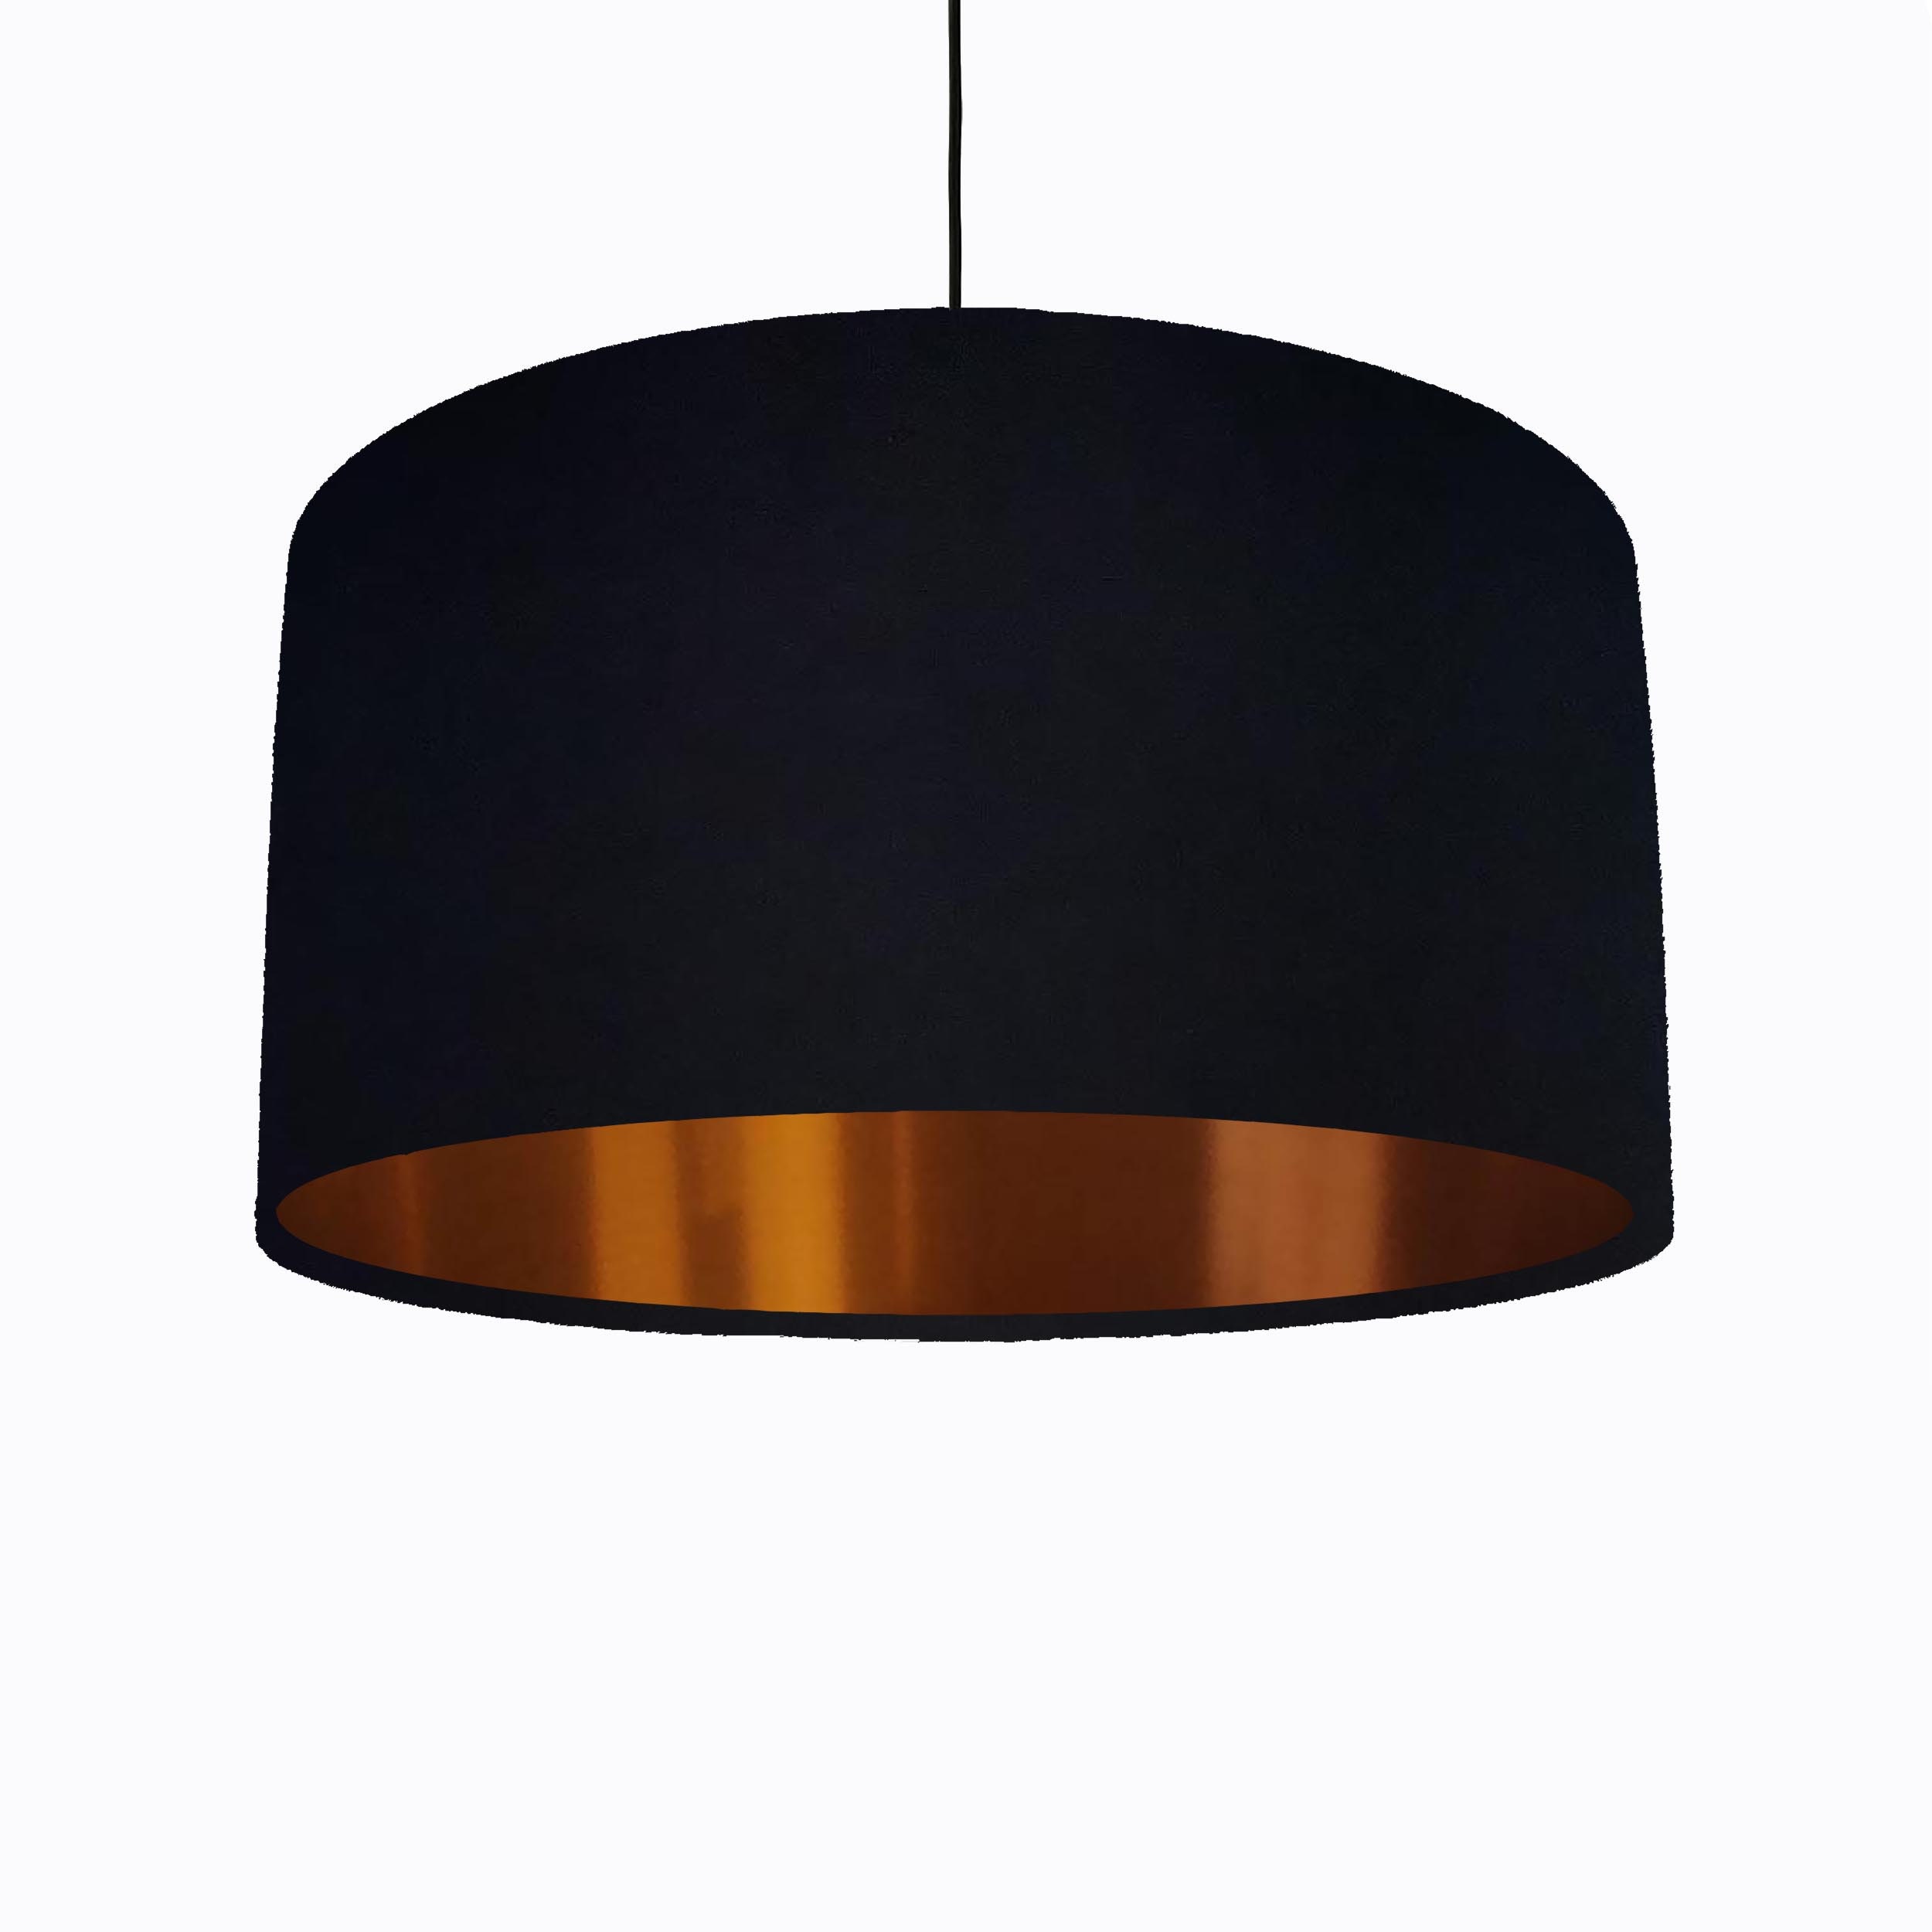 Oval Lampshade Balck Velvet Fabric with a Brushed Copper Metallic Lining 